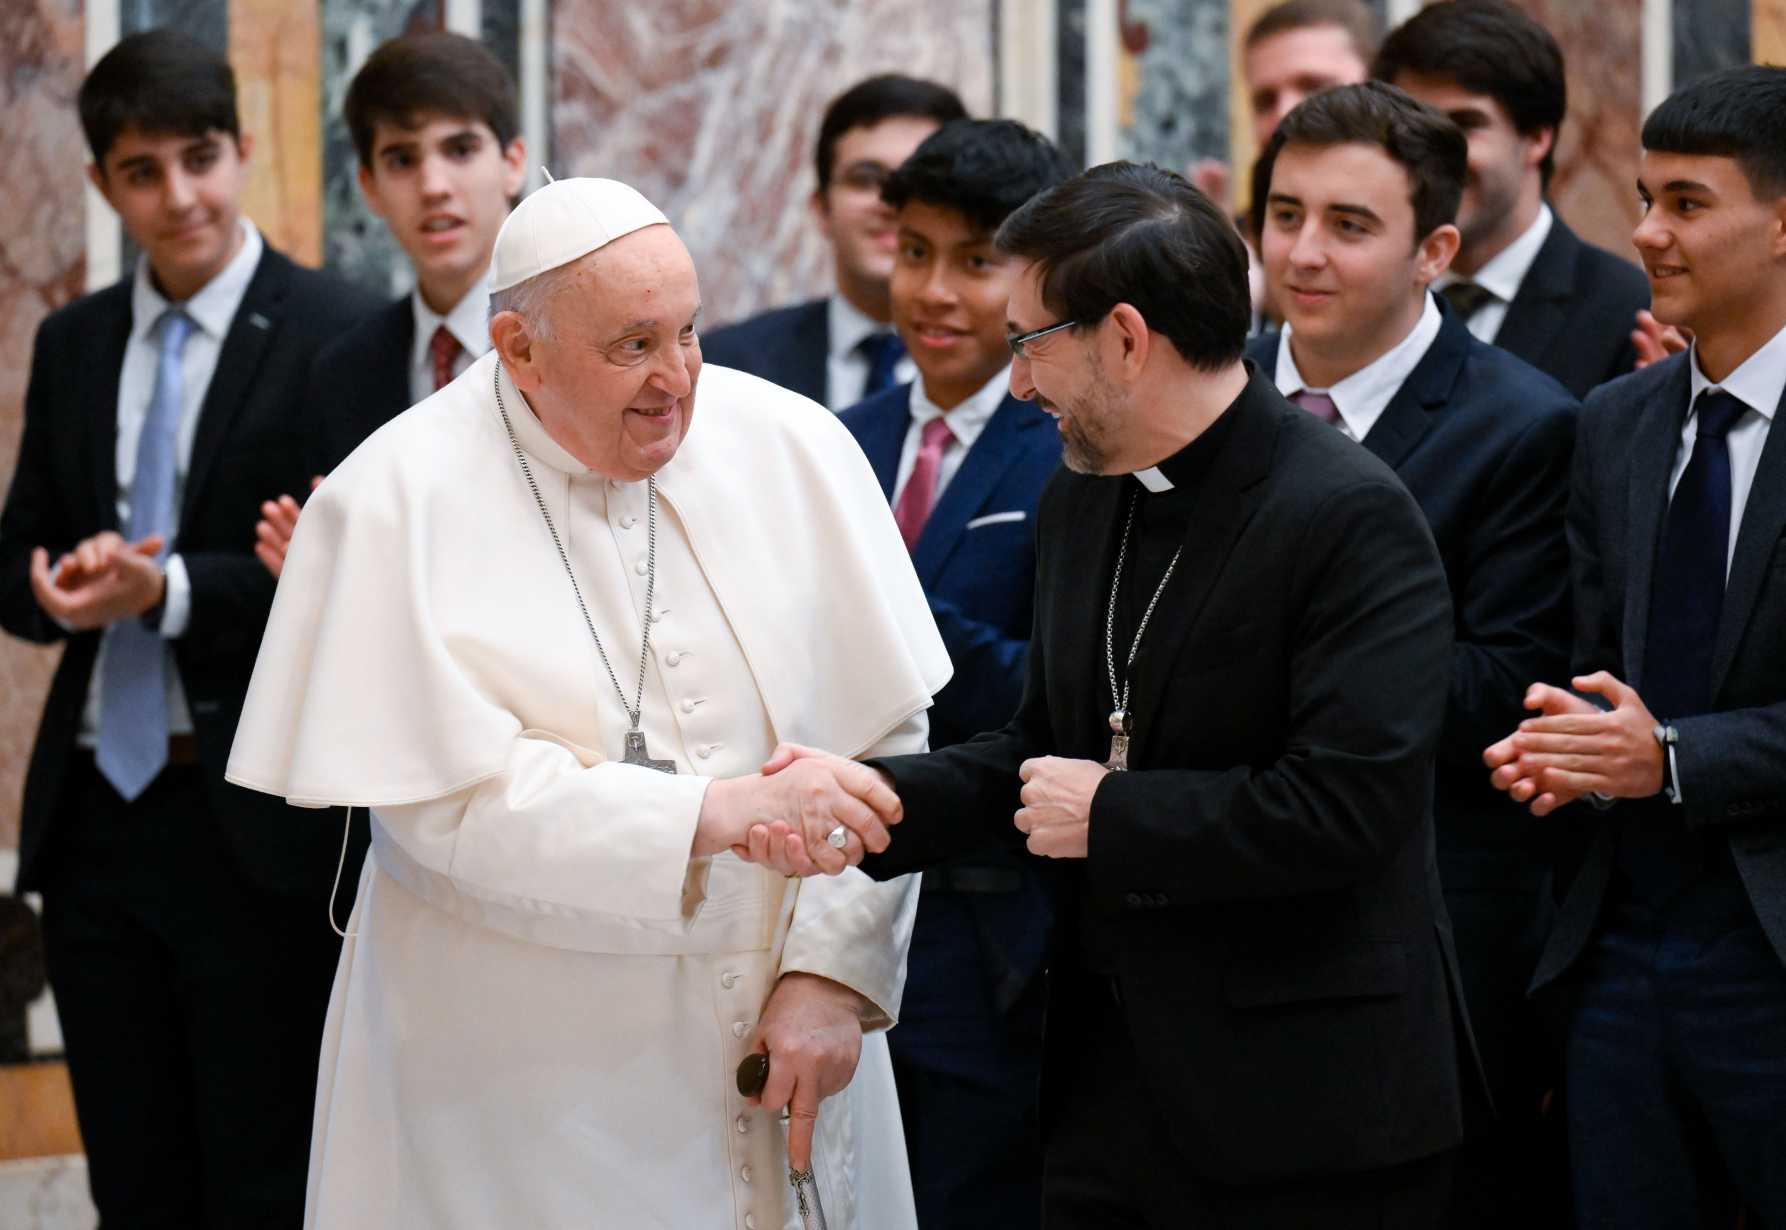 Pope tells seminarians to put the Eucharist at the center of formation